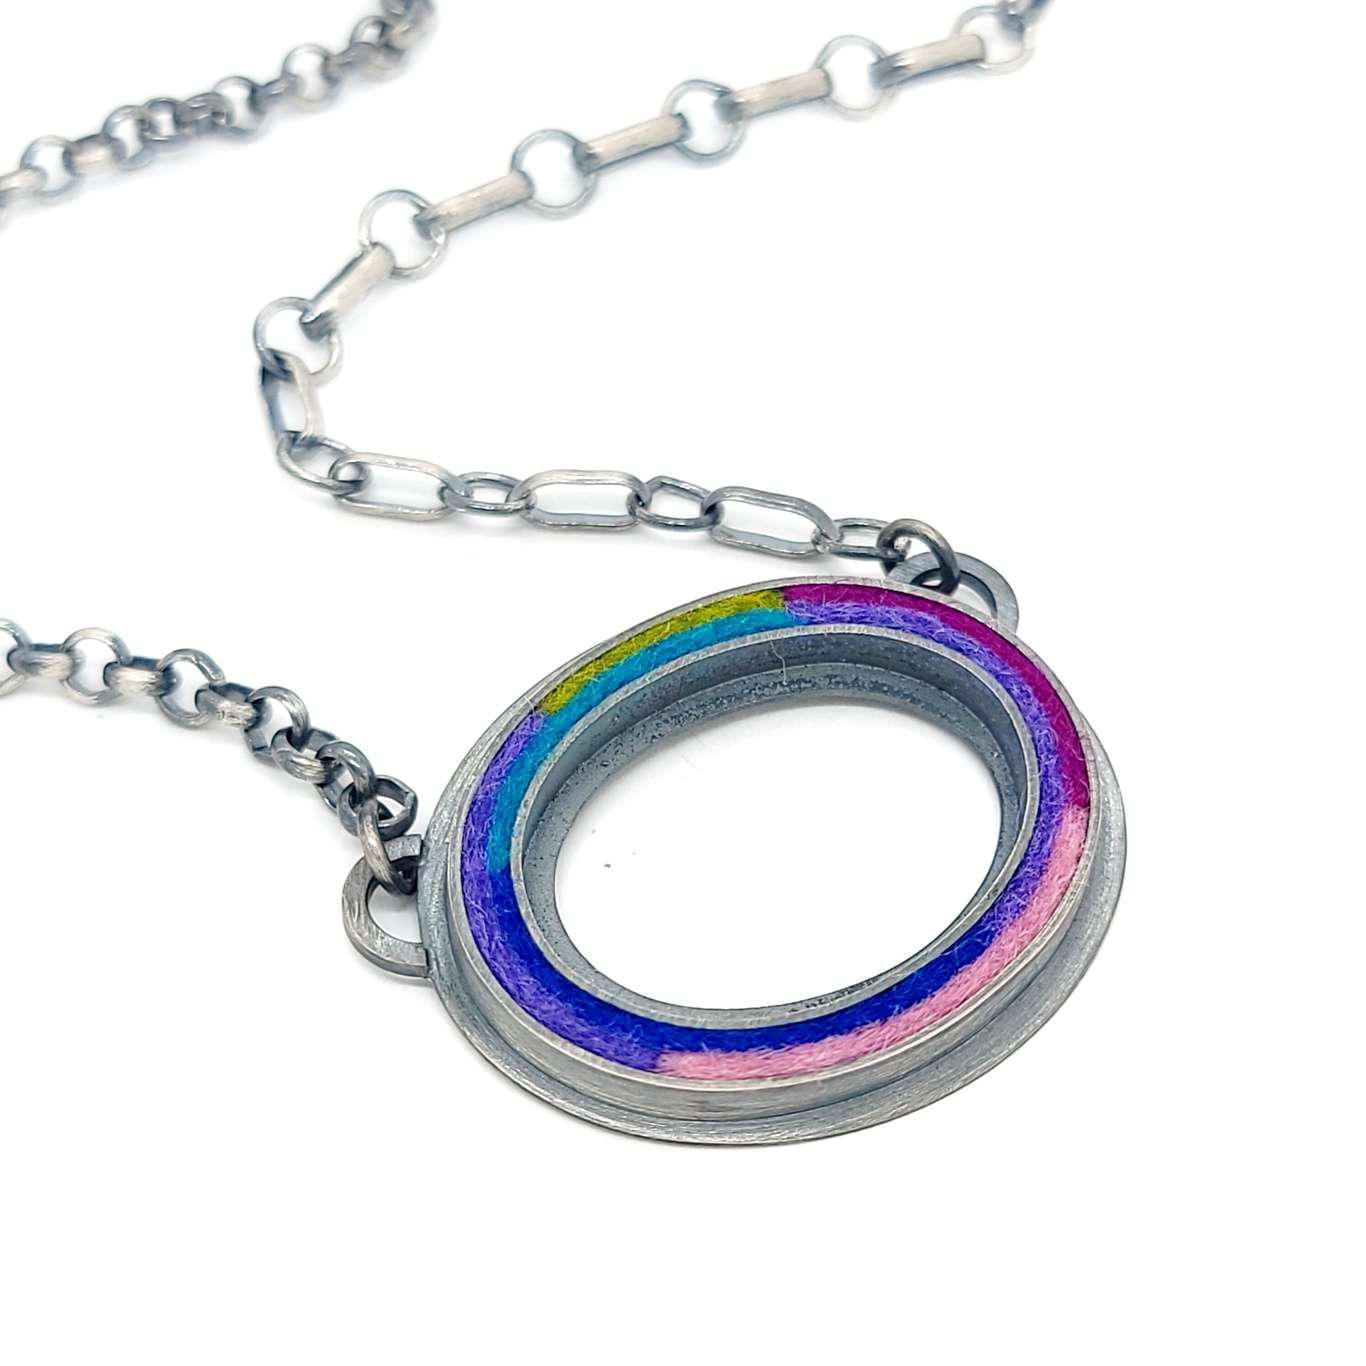 Necklace - Large Oval Donut in Cool by Michele A. Friedman